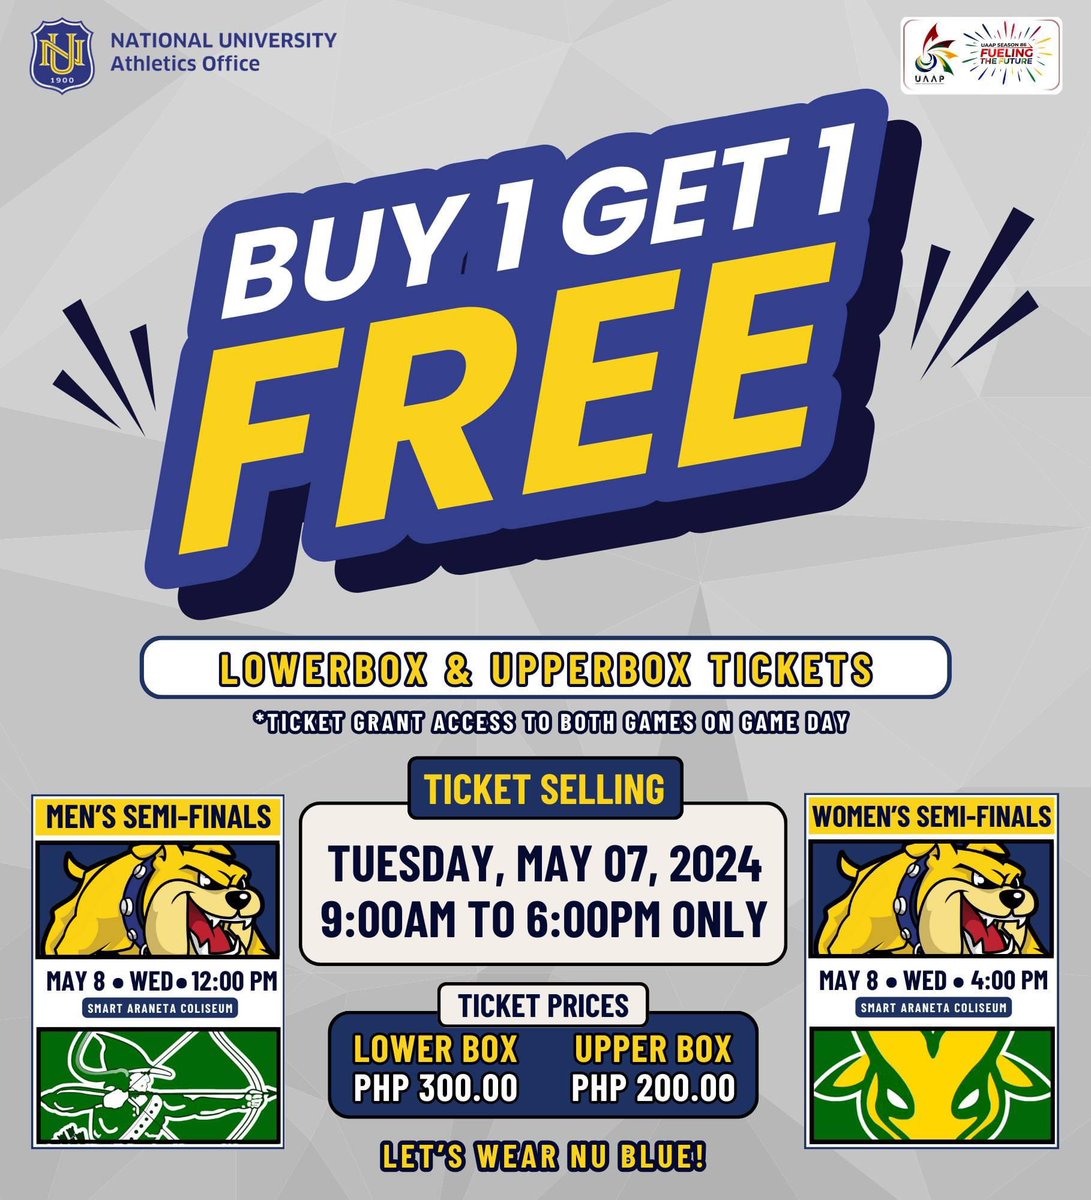 Ticket selling in National University Manila is from 9:00am to 6:00pm tomorrow only. Grab yours and see you this Wednesday! #GoBulldogs #NULetsGo #UAAPSeason86